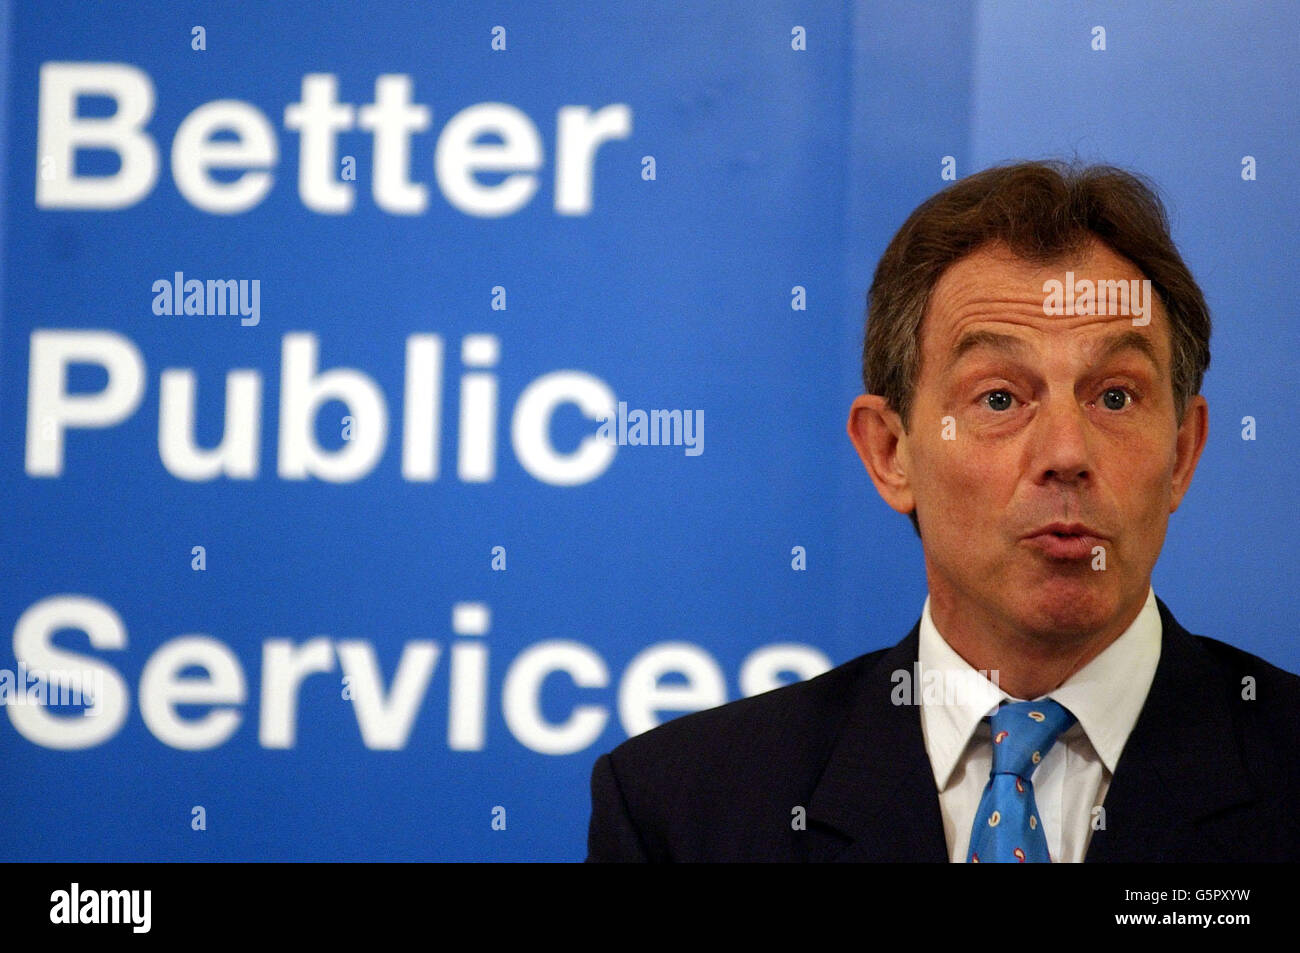 Prime Minister Tony Blair speaking at the launch of a Public services pamphlet at Downing Street in central London. Stock Photo